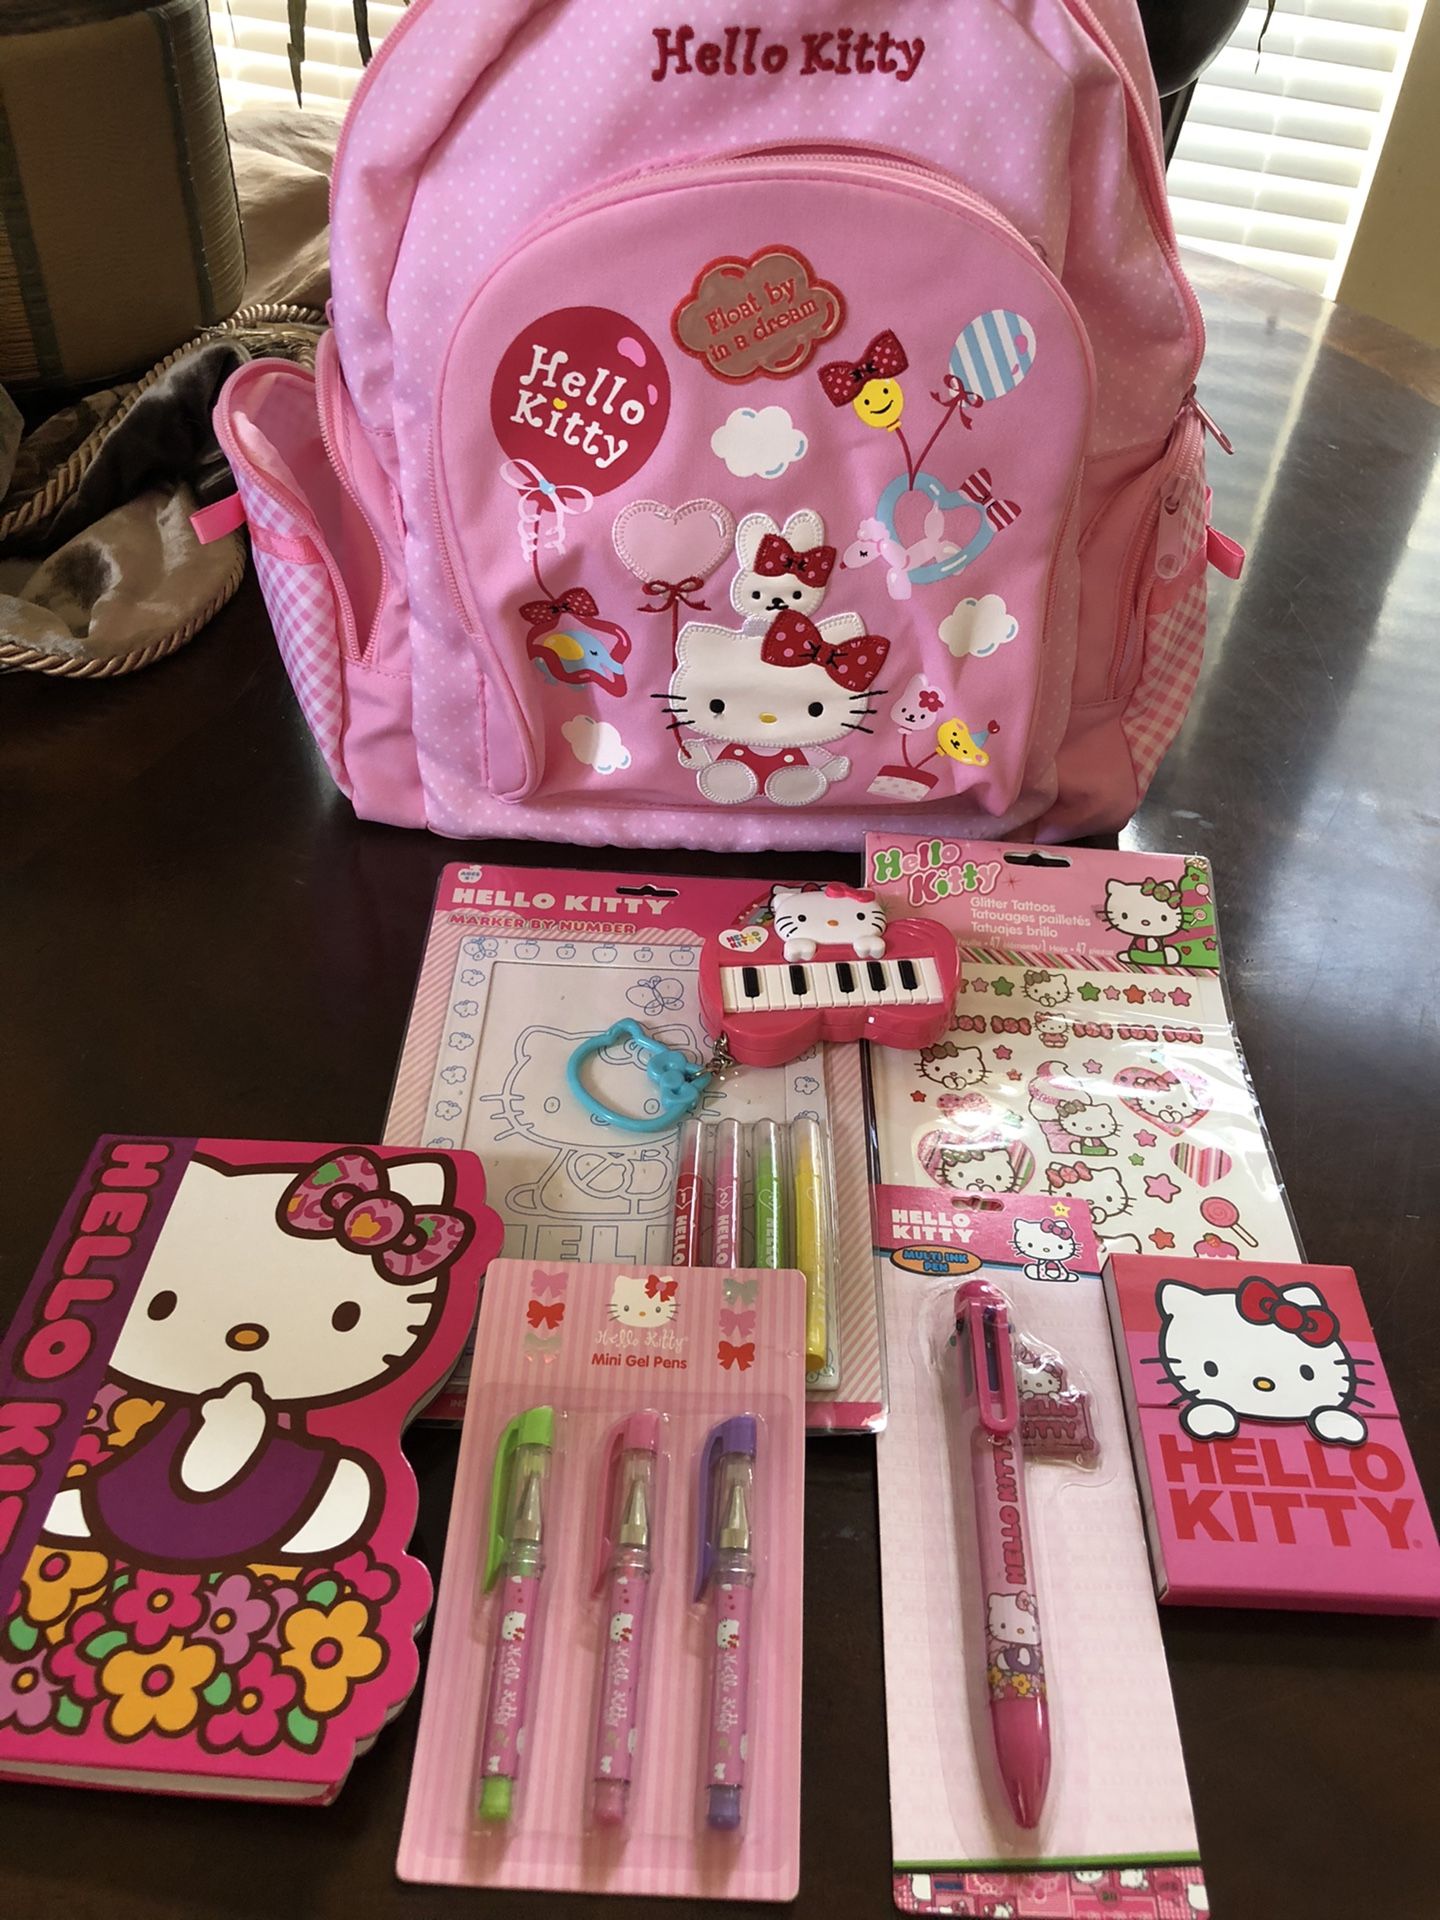 Everything Hello Kitty and collectibles